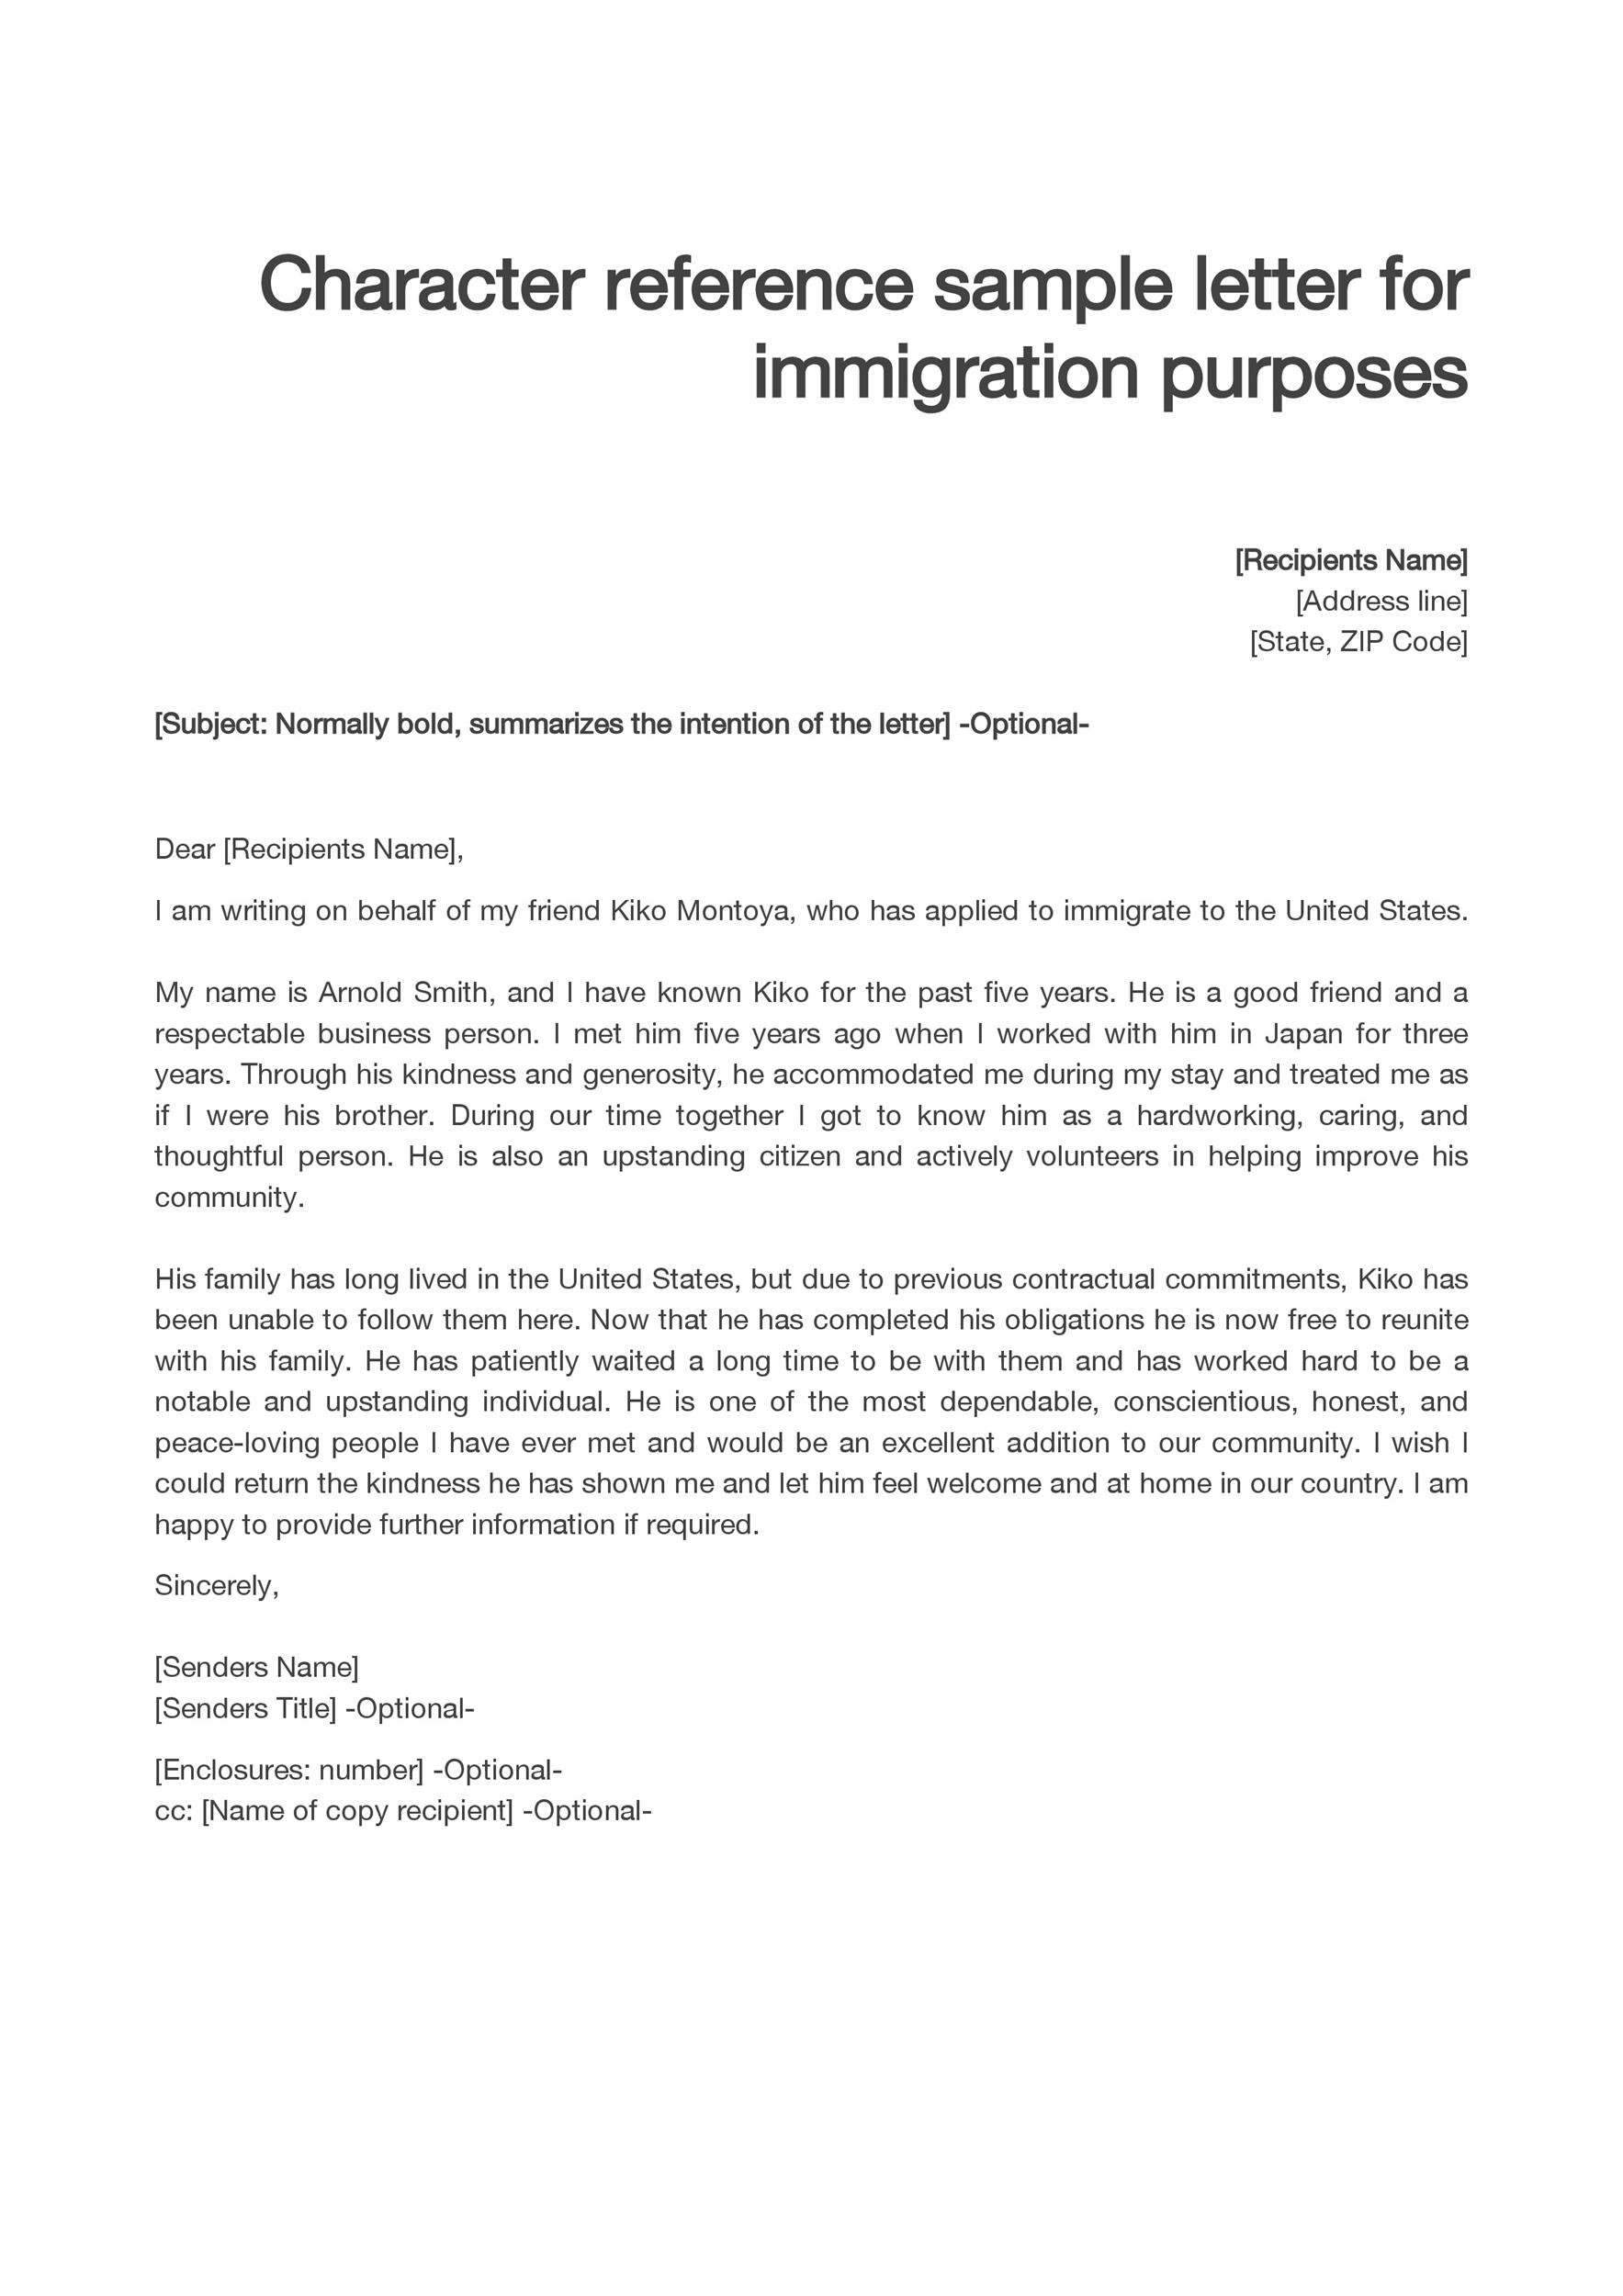 36 Free Immigration Letters (Character Reference Letters for Immigration)